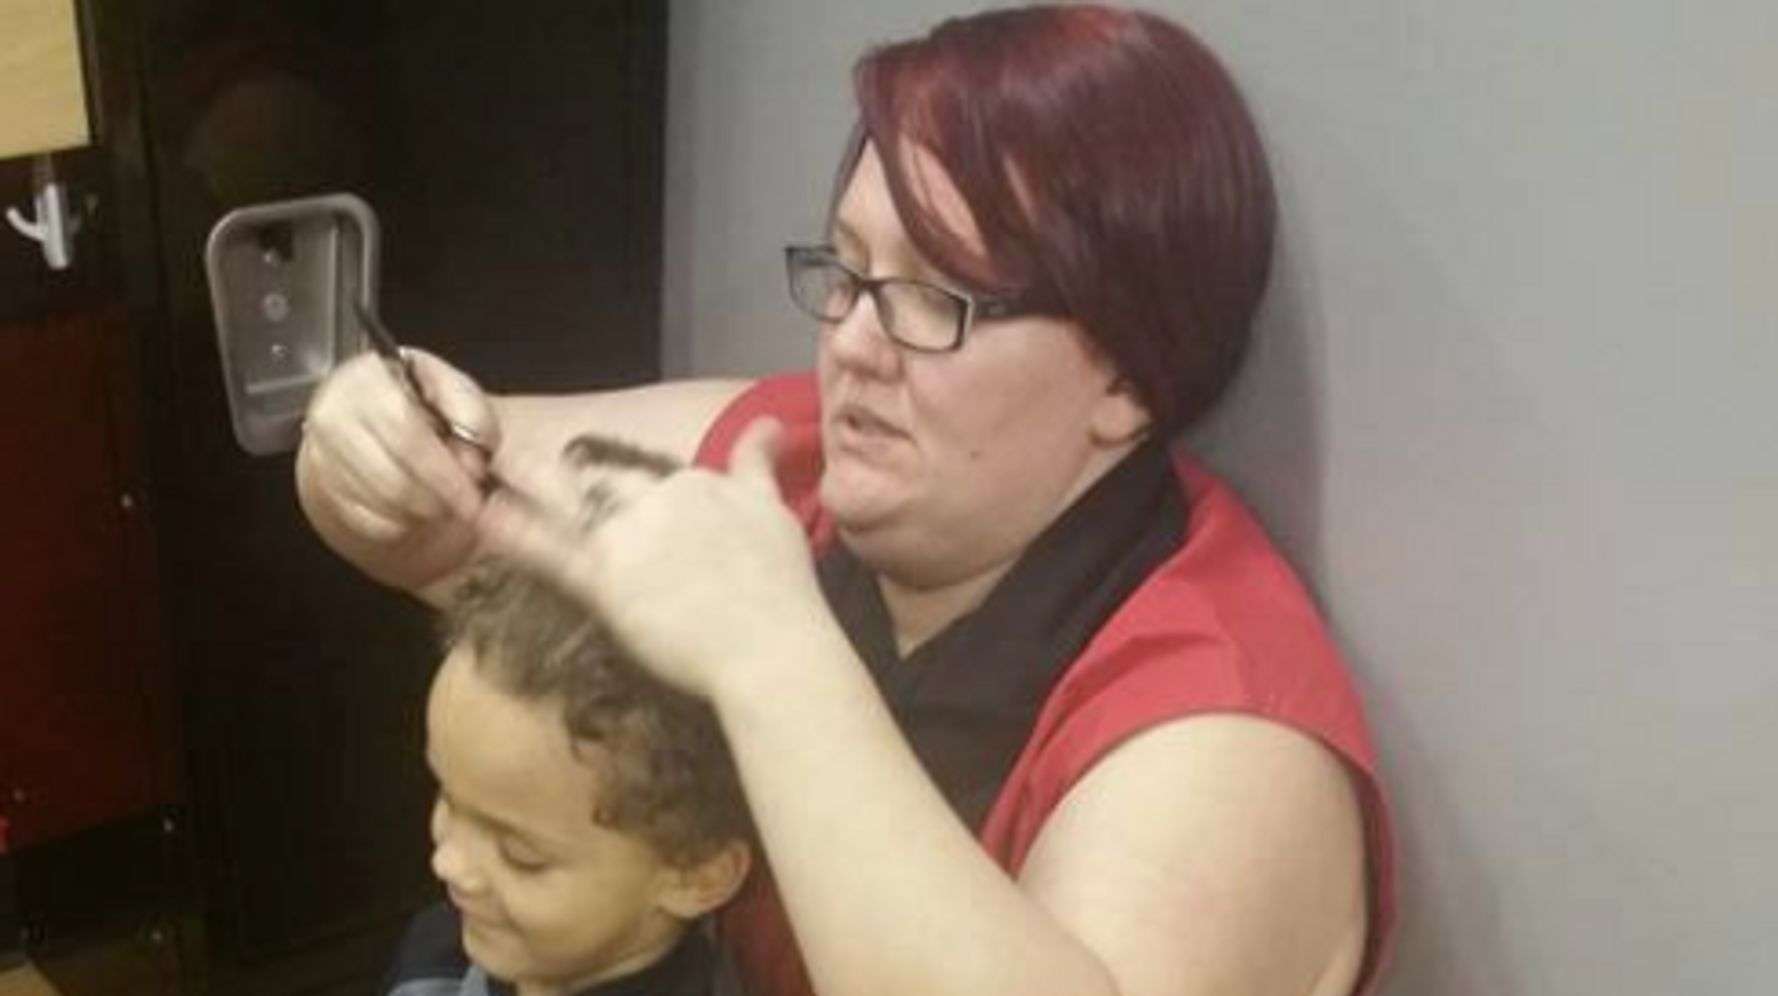 Mum Praises Hairdresser For Not Giving Up On Son With Autism Who Hates ...